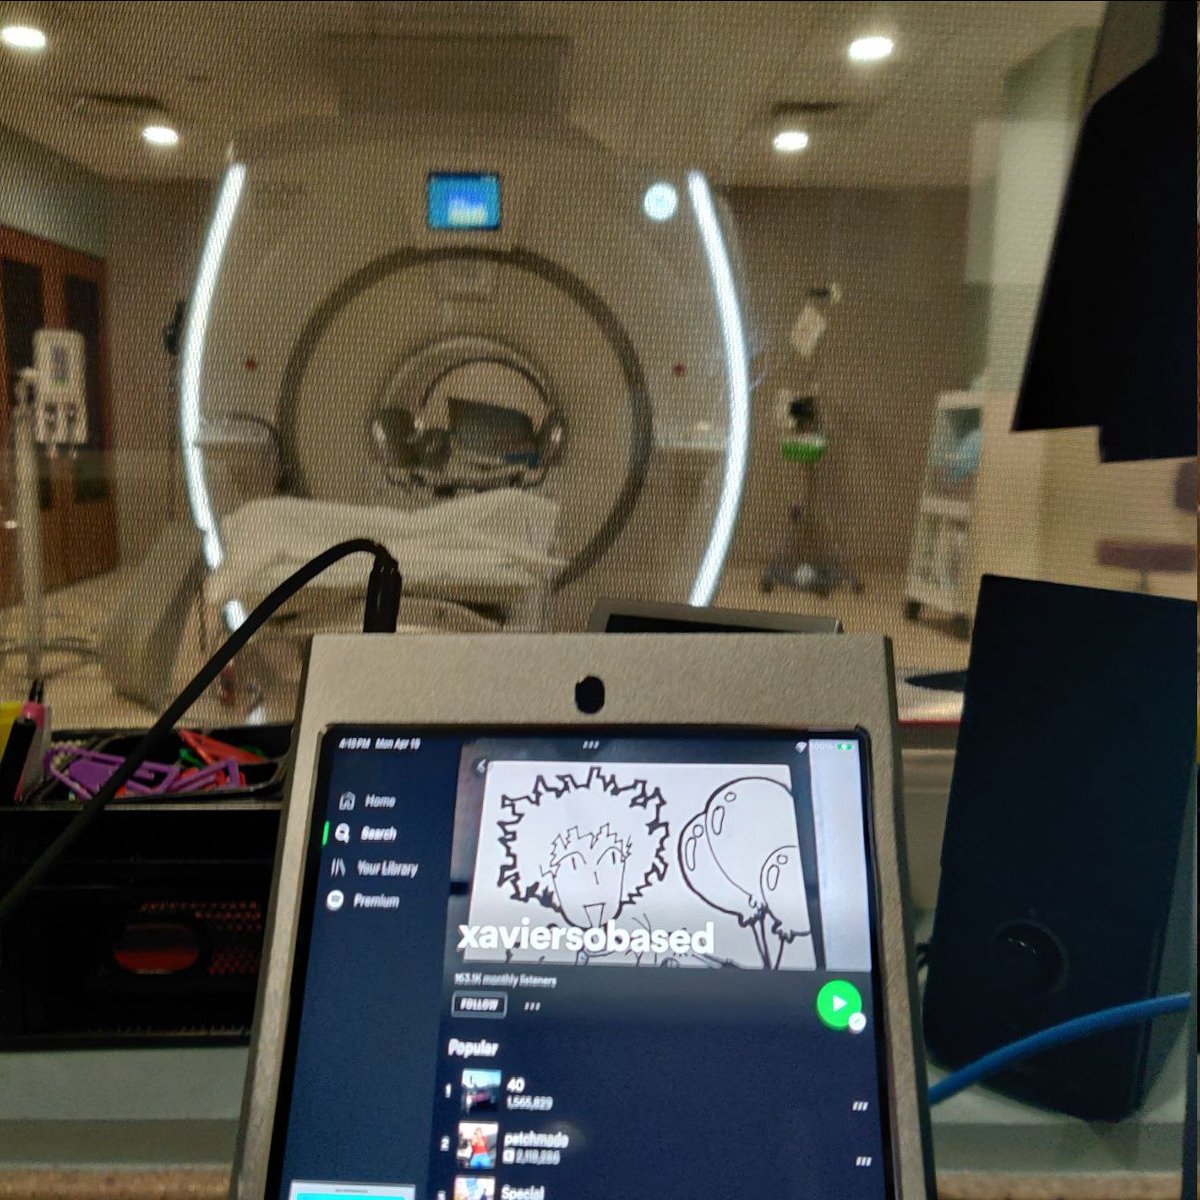 First person to listen to xav in an MRI